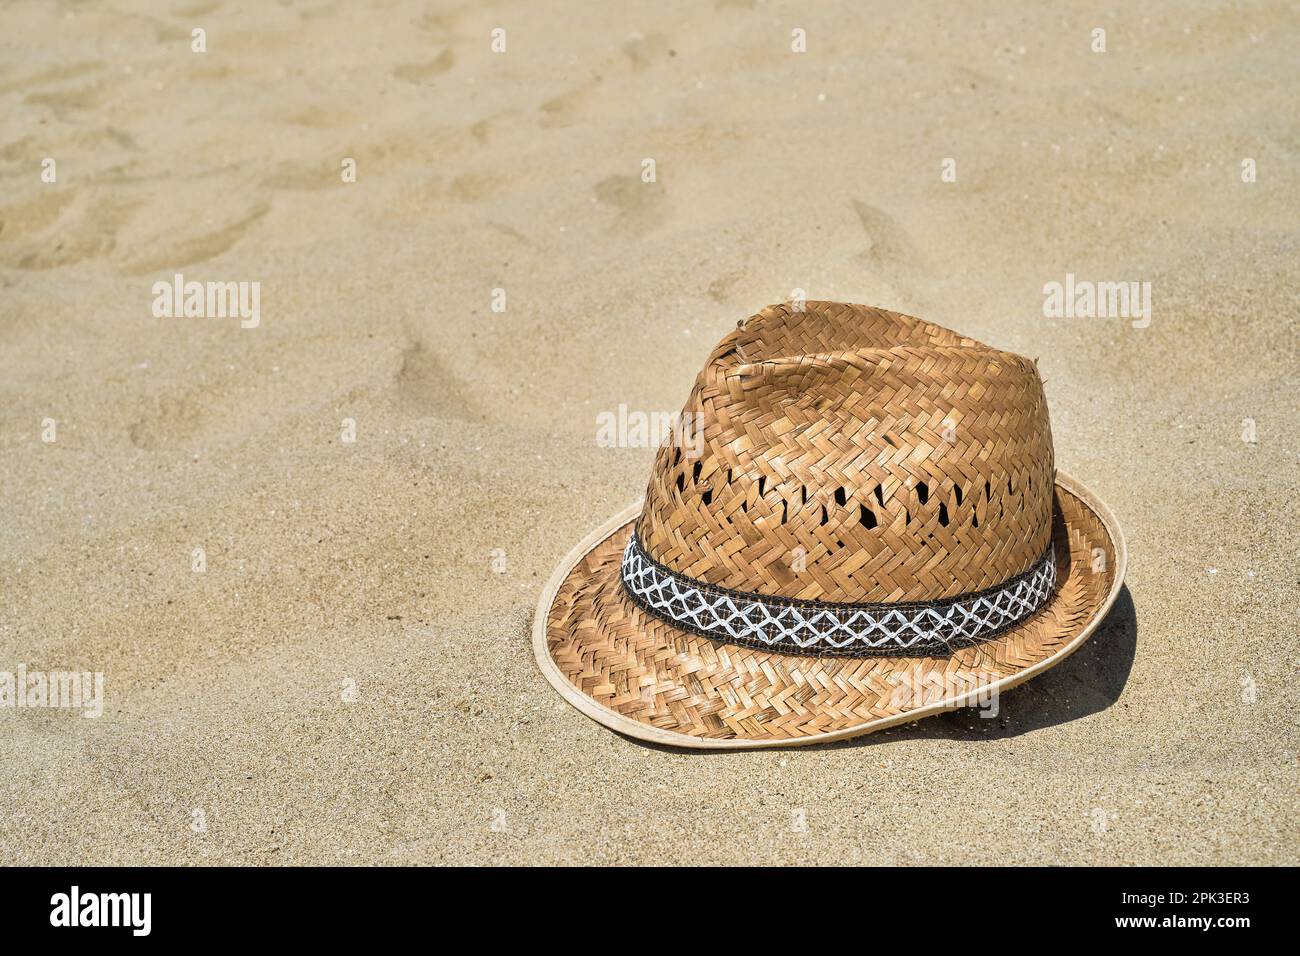 Men's straw beach hat on the sand at the beach, close-up, copy